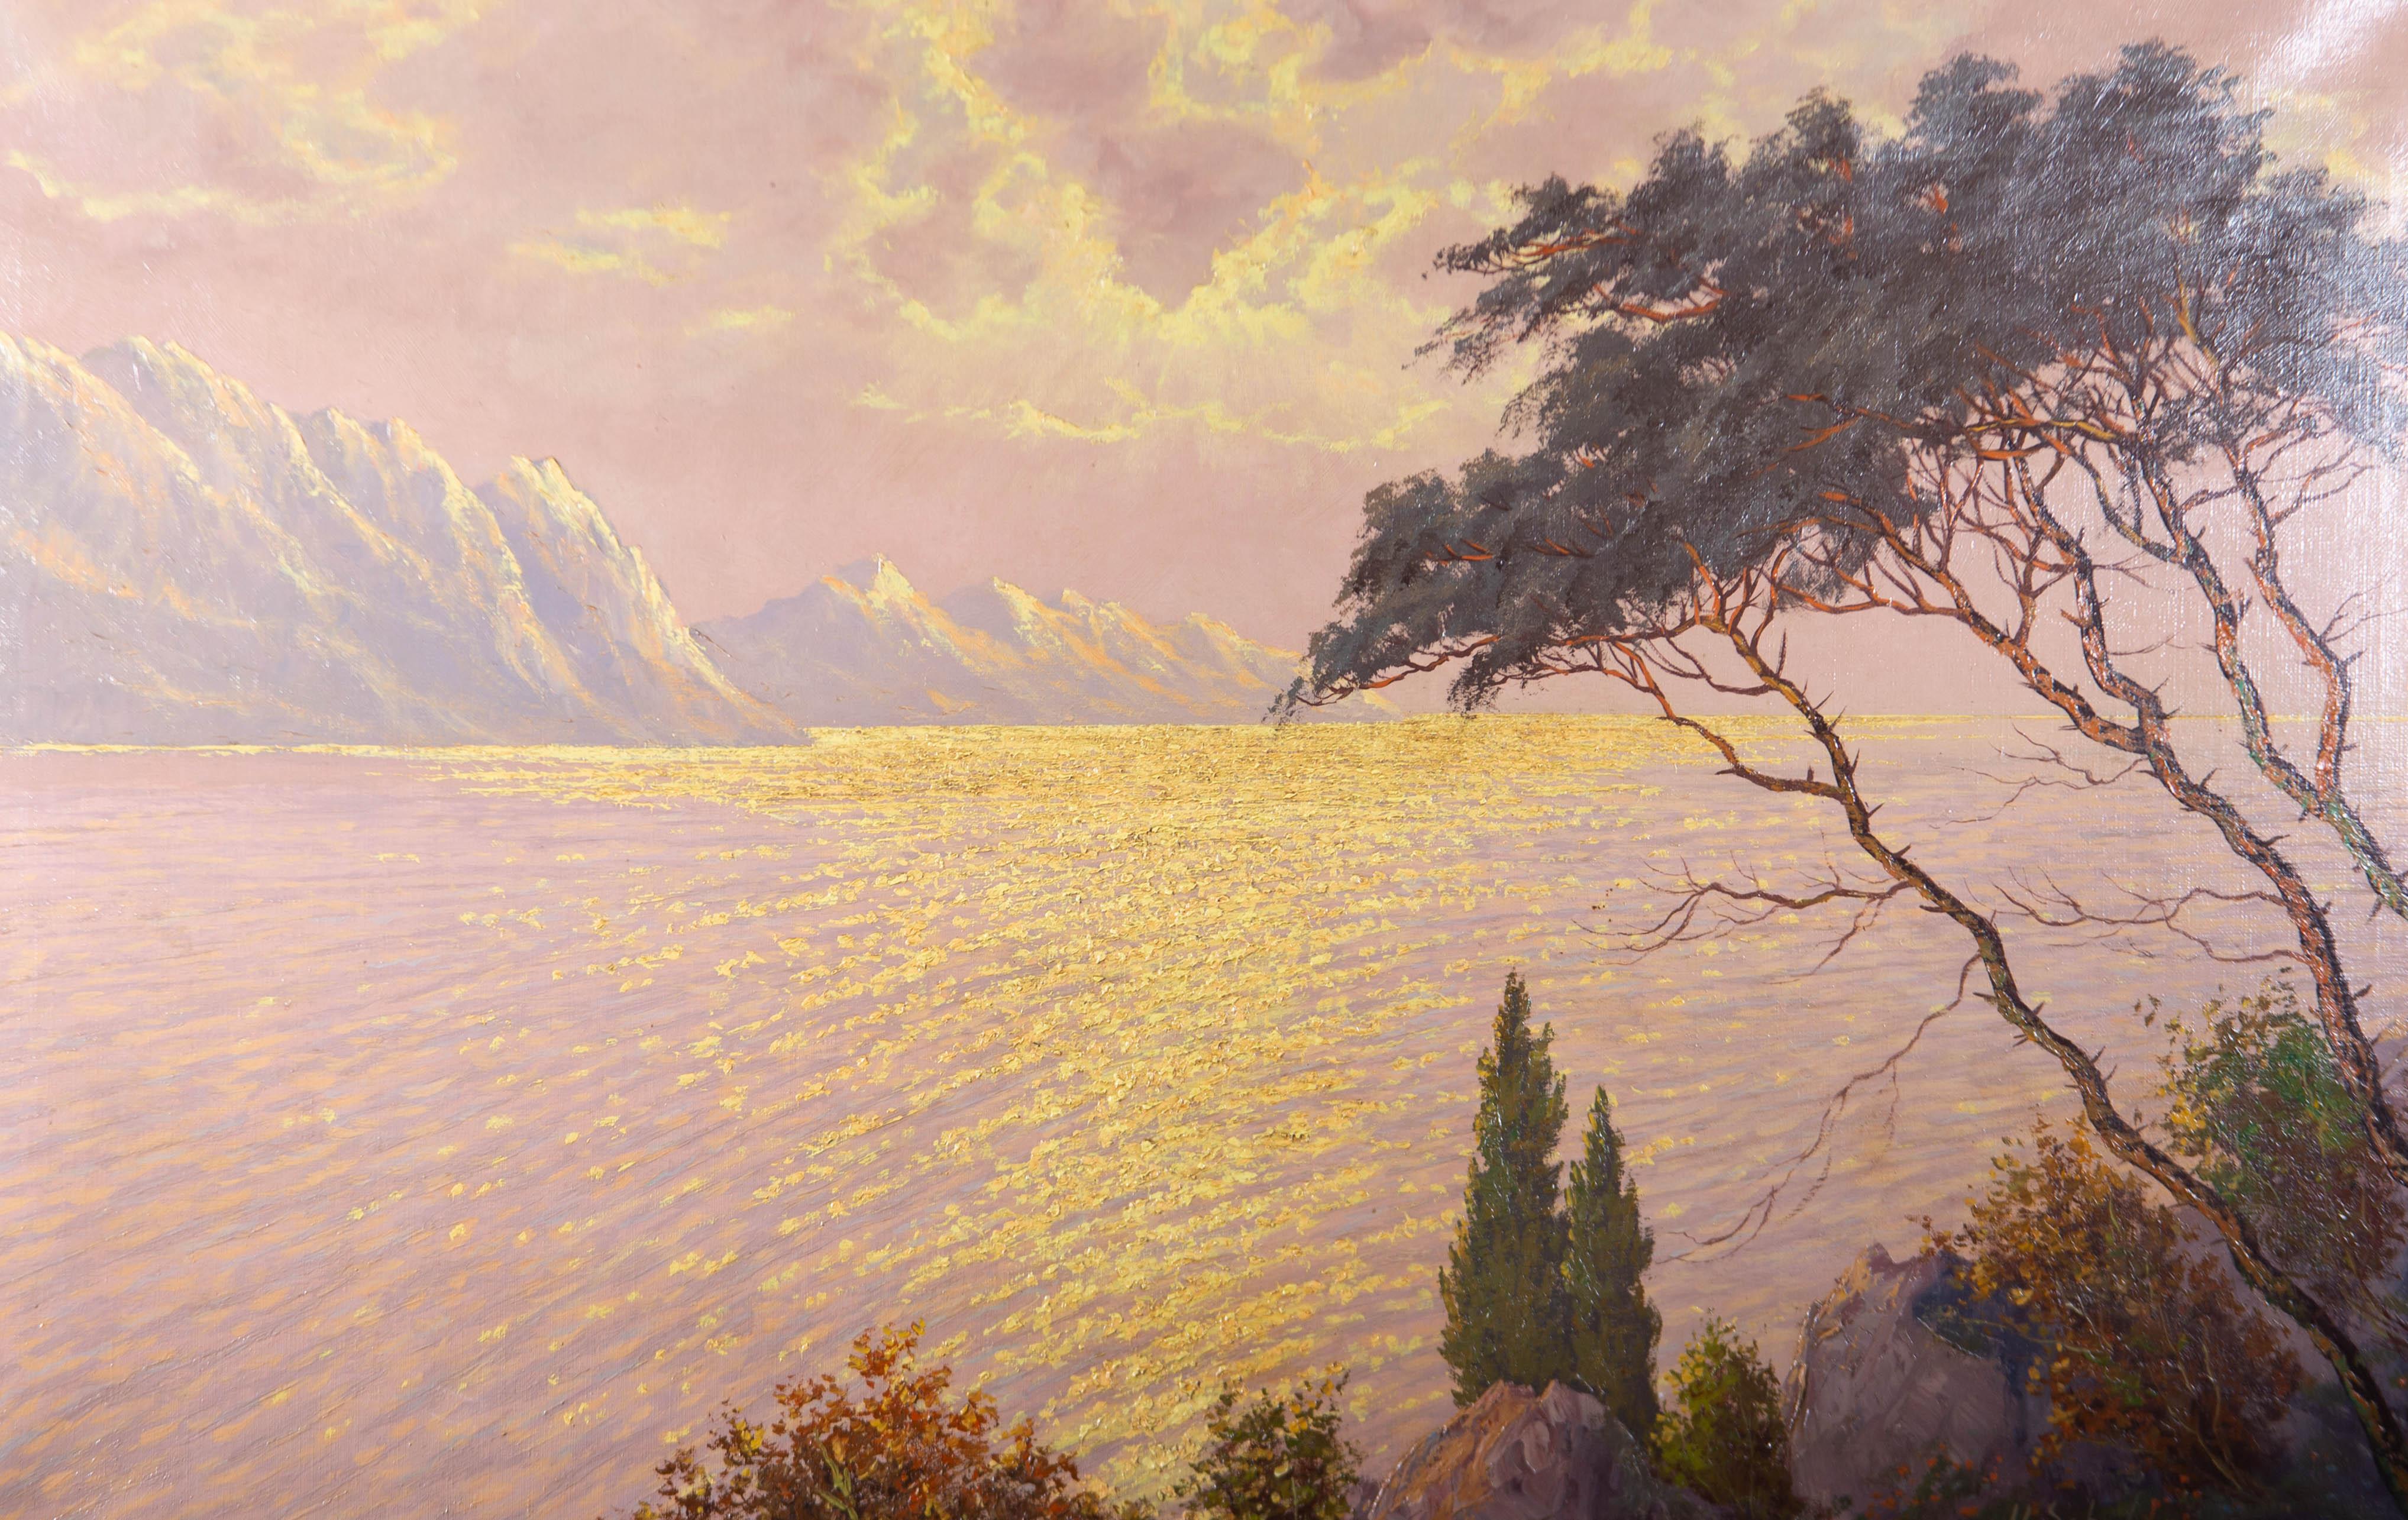 A striking oil landscape showing a Mediterranean coastline with cypress and pine trees on the rocky shore. A beautiful glittering ocean reflects the gold light of the setting sun, disappearing behind clouds and the distant mountains. The artist has